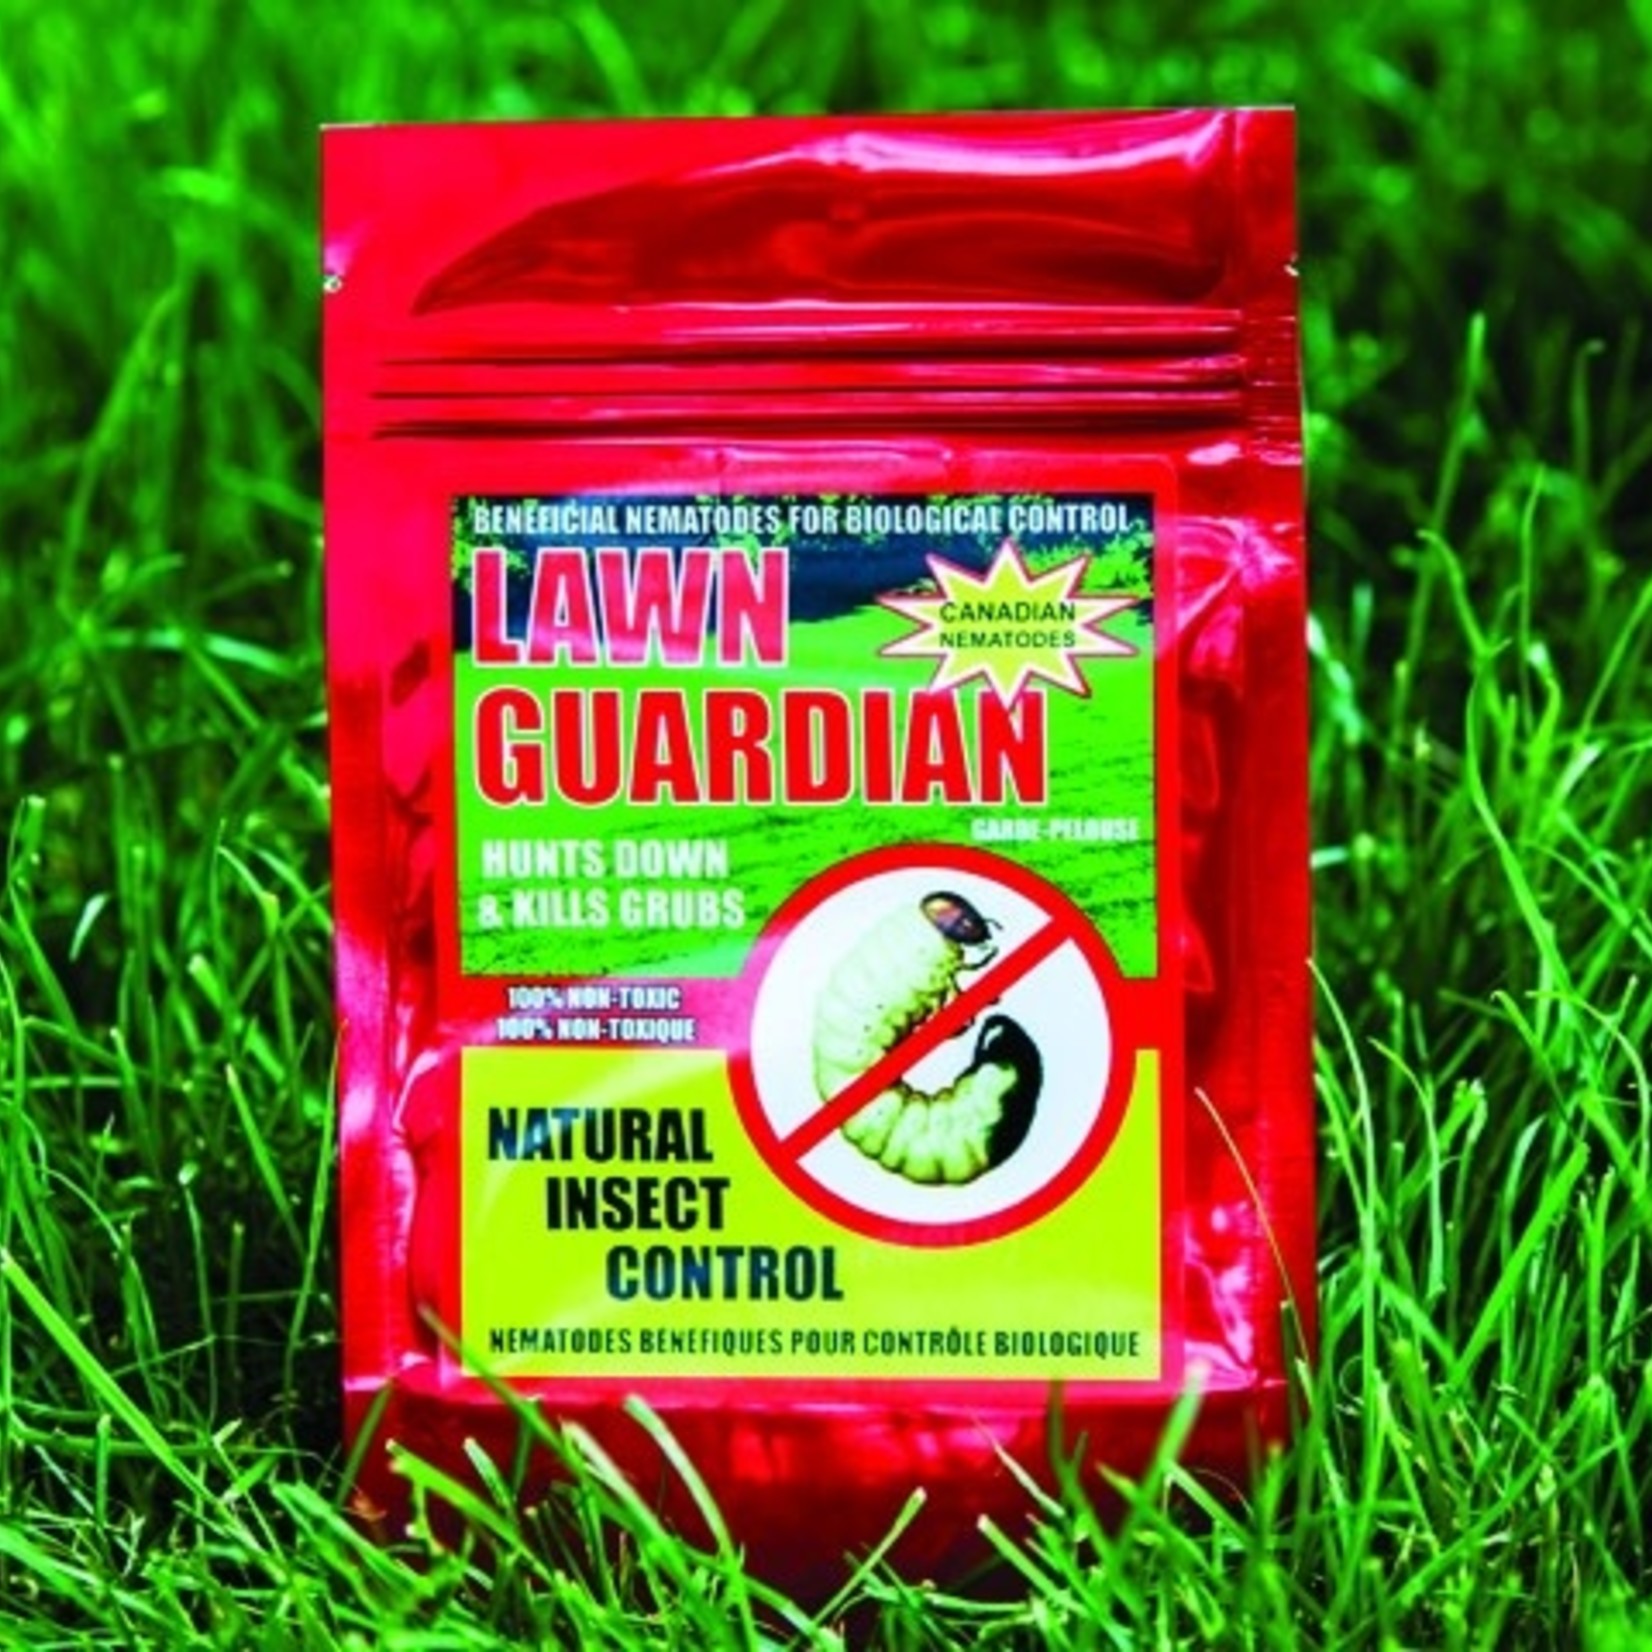 Natural Insect Control Nematodes Lawn Guardian (GrubTreatment) 2000-3000 sq ft